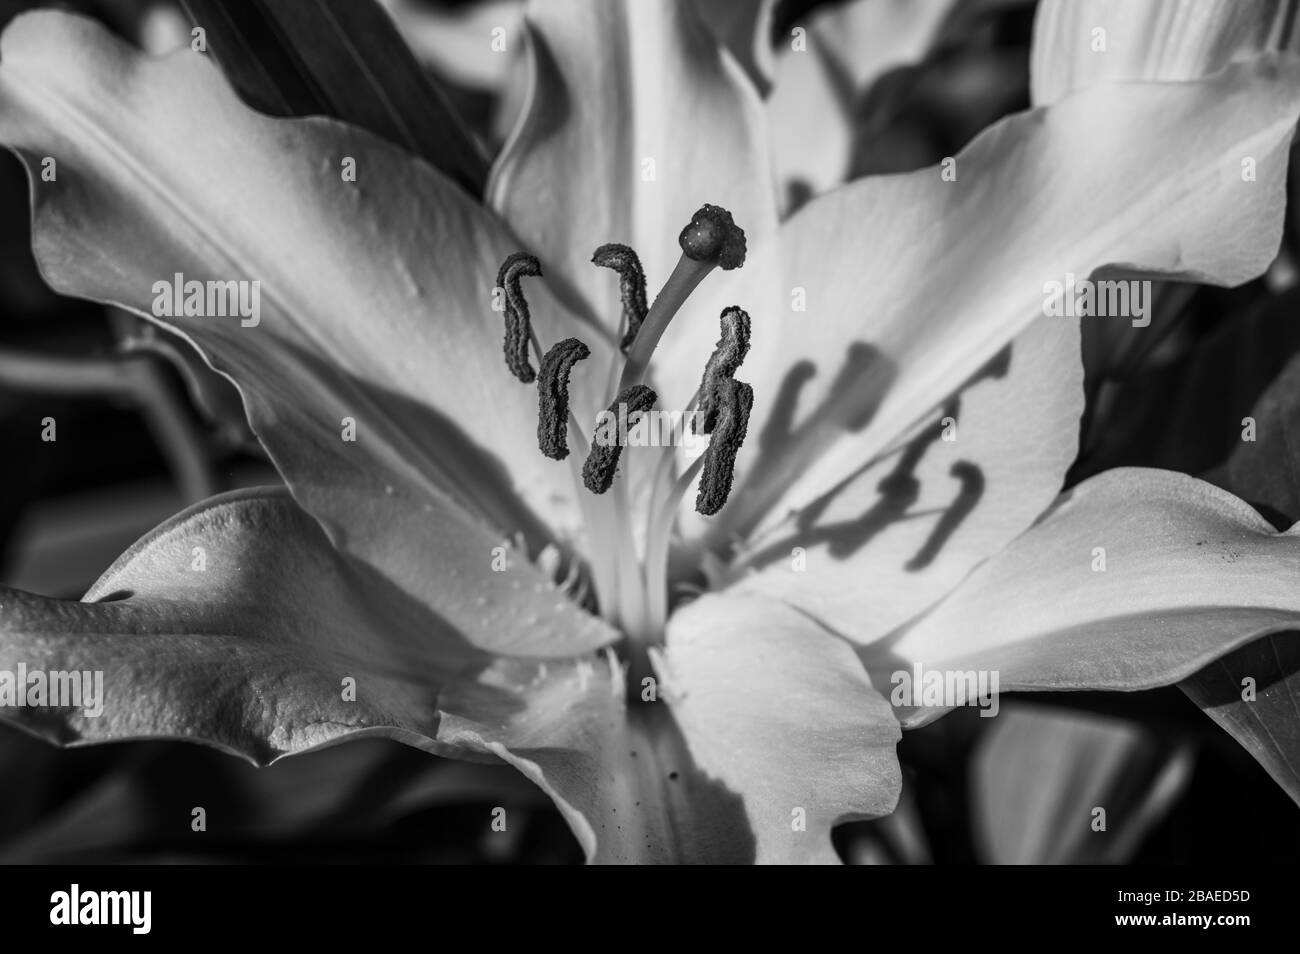 Black and white closeup of a white lily flower's stigma, style, stamens, filaments and petals in direct sunlight creating shadows. Stock Photo